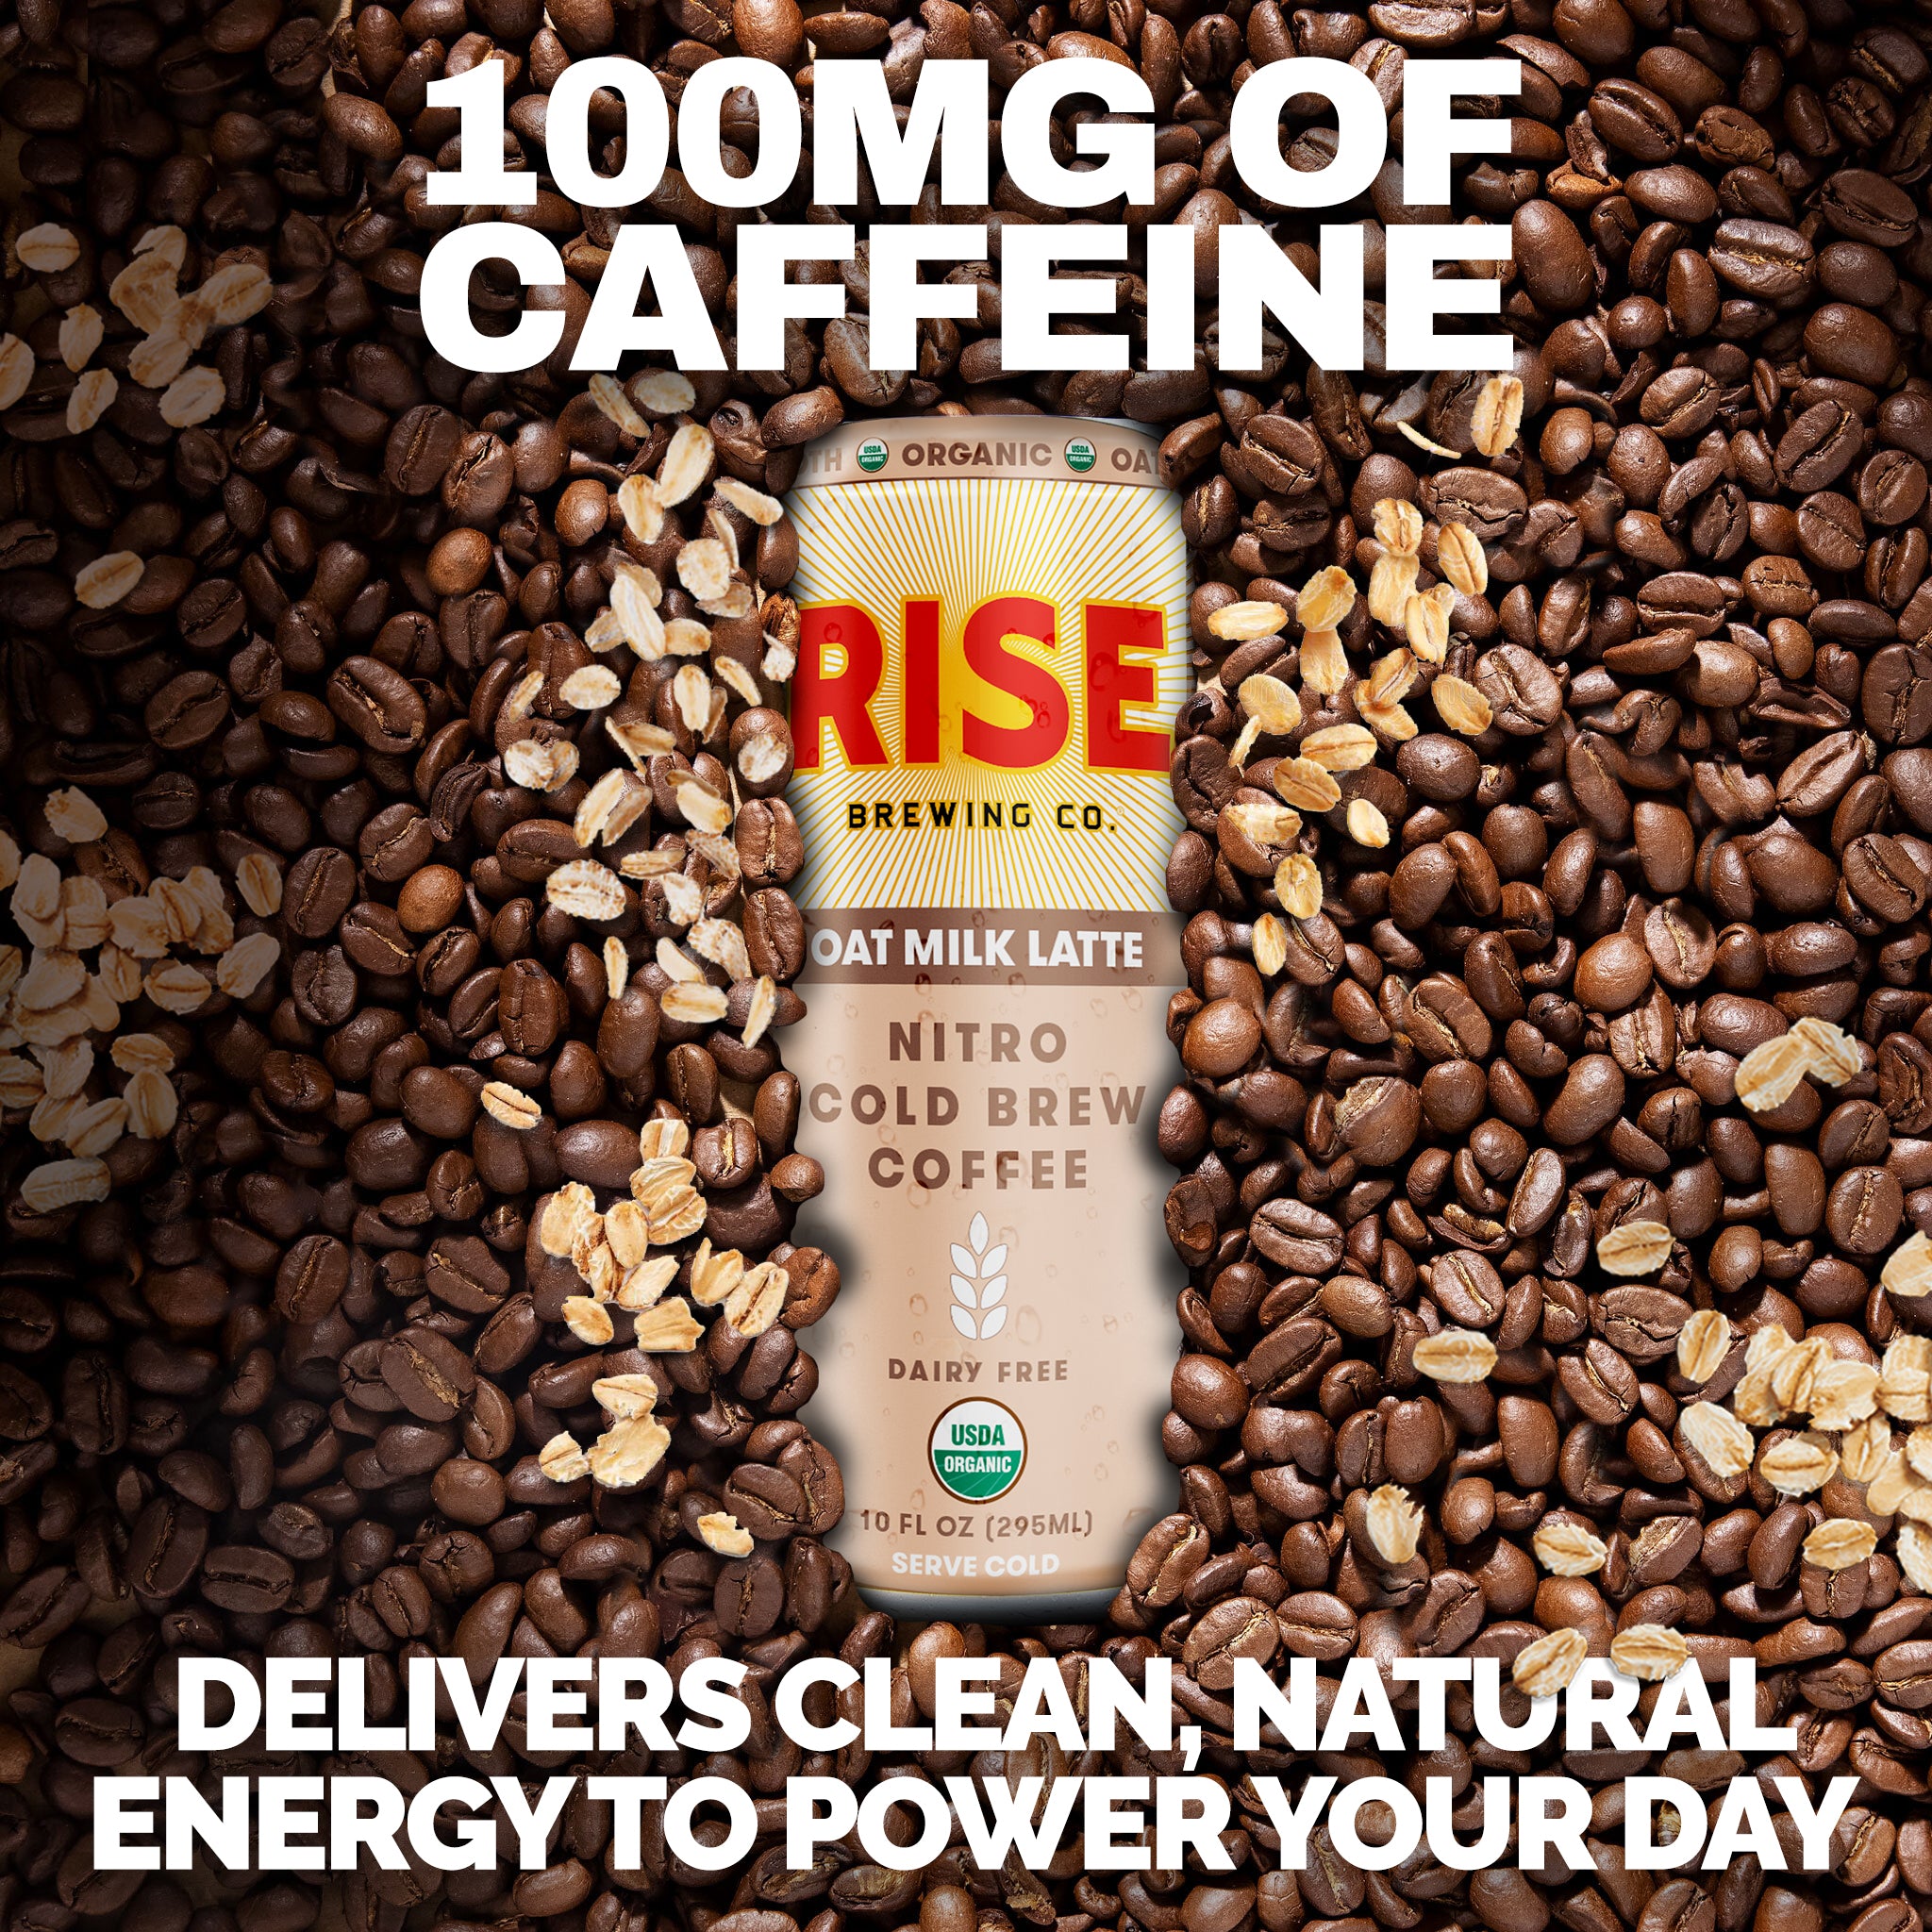 100mg caffeine delivers clean, natural energy to power your day. RISE Brewing Co. Oat Milk Latte Nitro Cold Brew